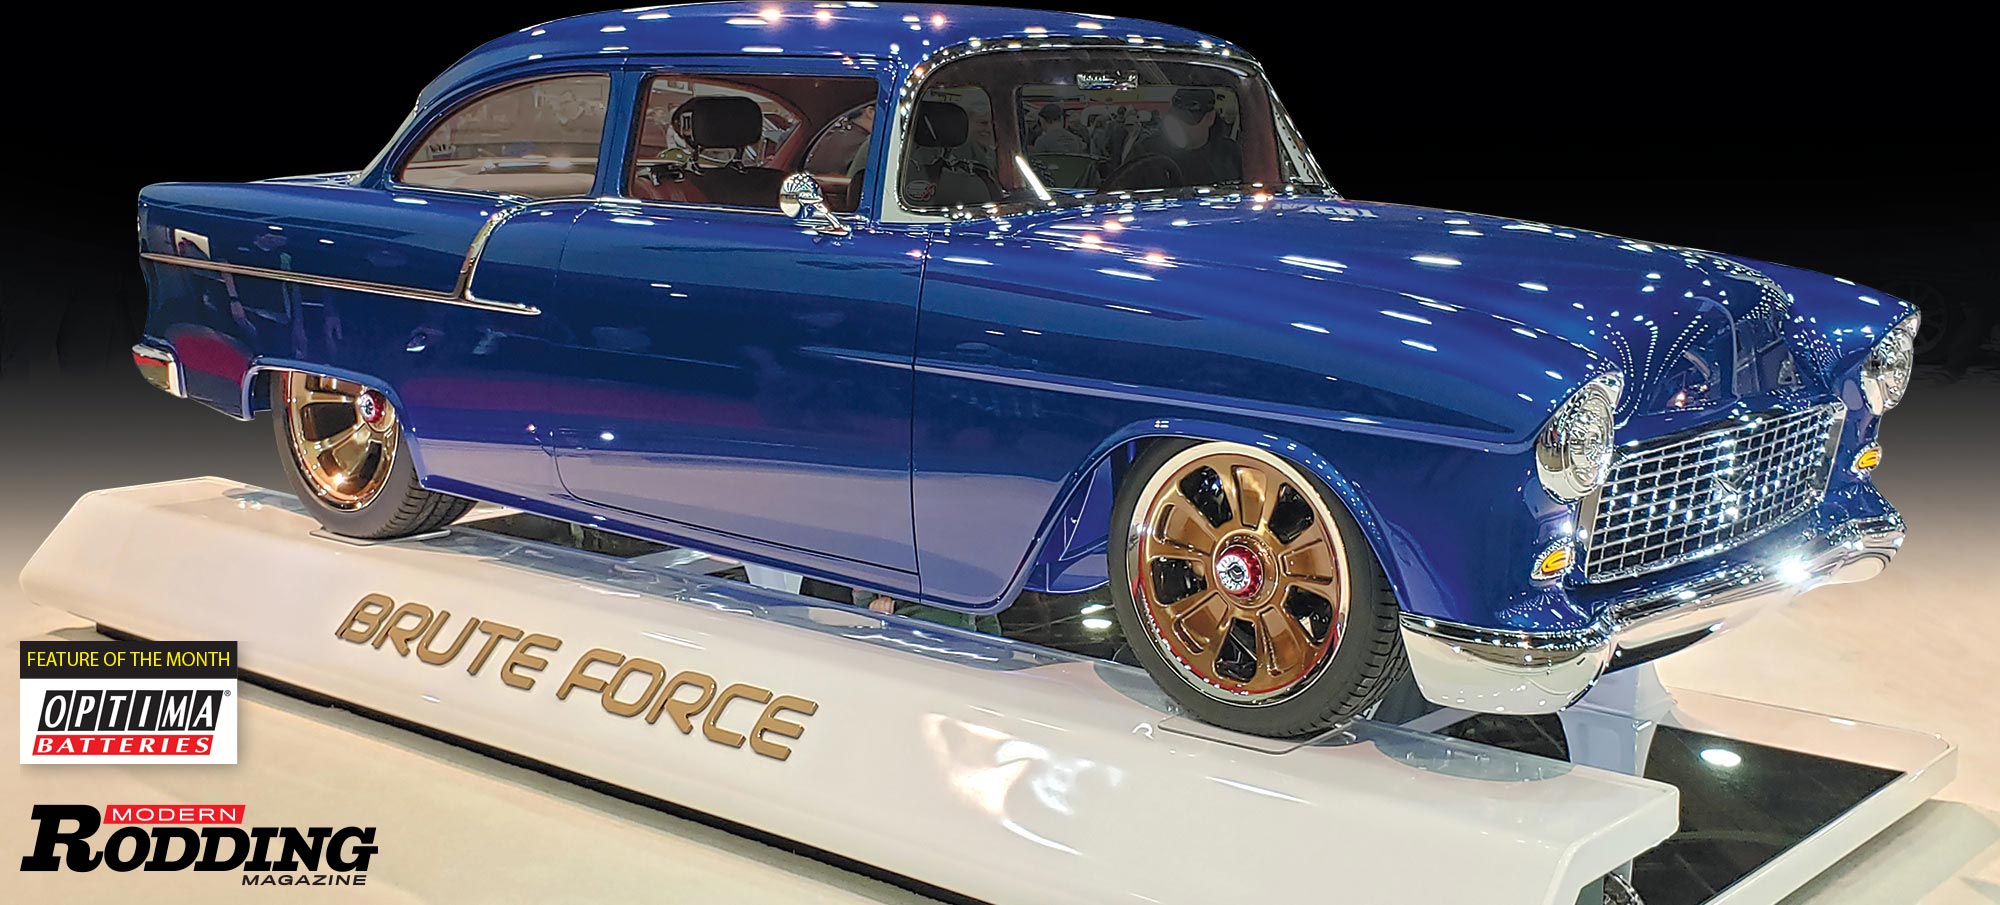 Brute Force 1955 CHEVY on display